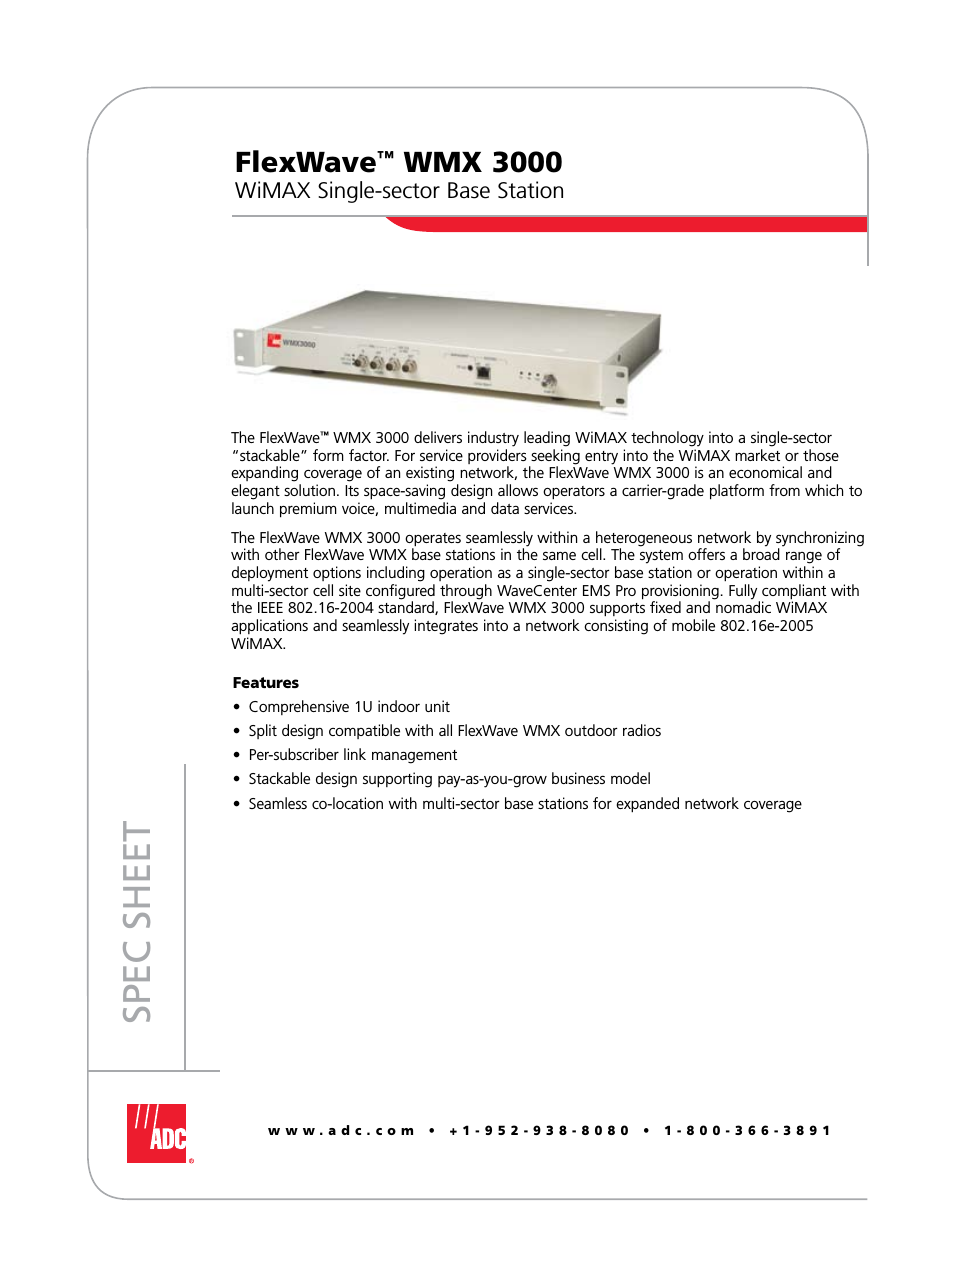 WiMAX Single-sector Base Station WMX 3000